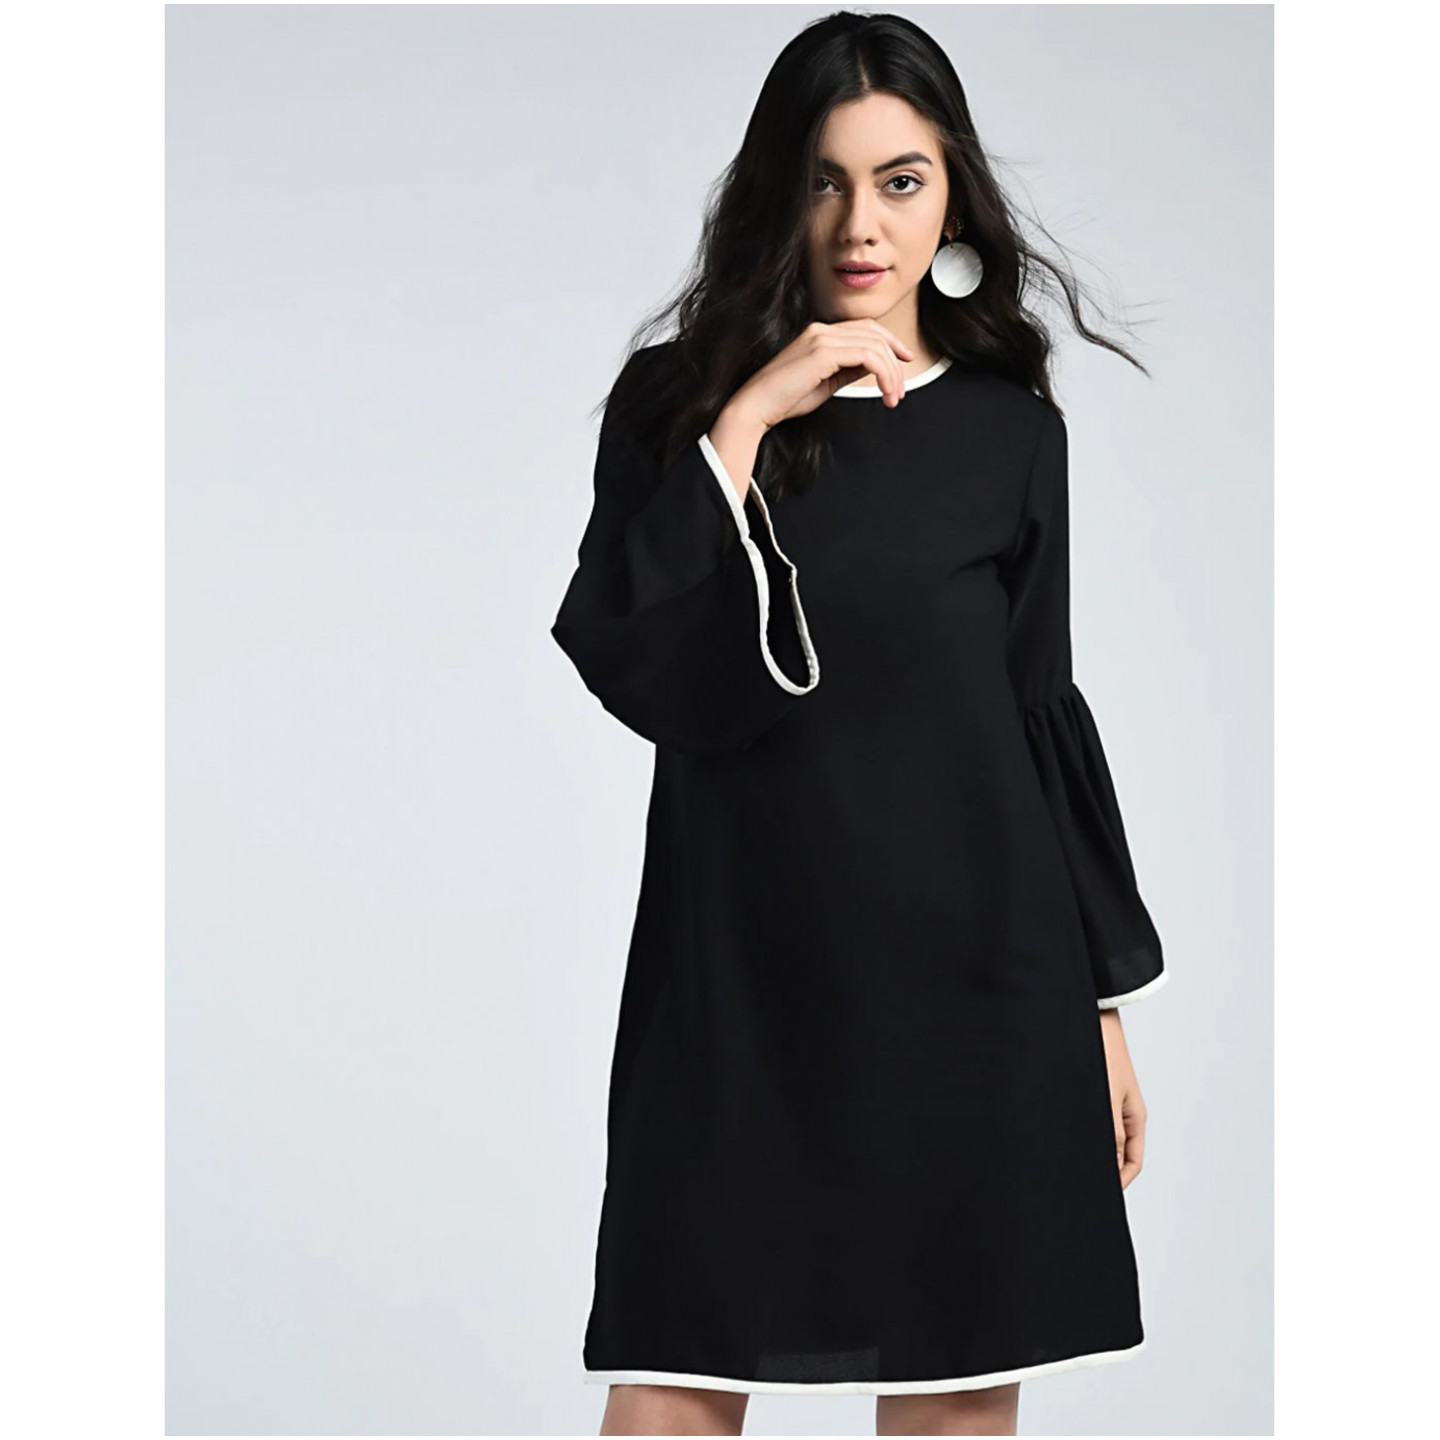 Paretto Womens Bell Sleeved Contrast Piping Black Midi Dress